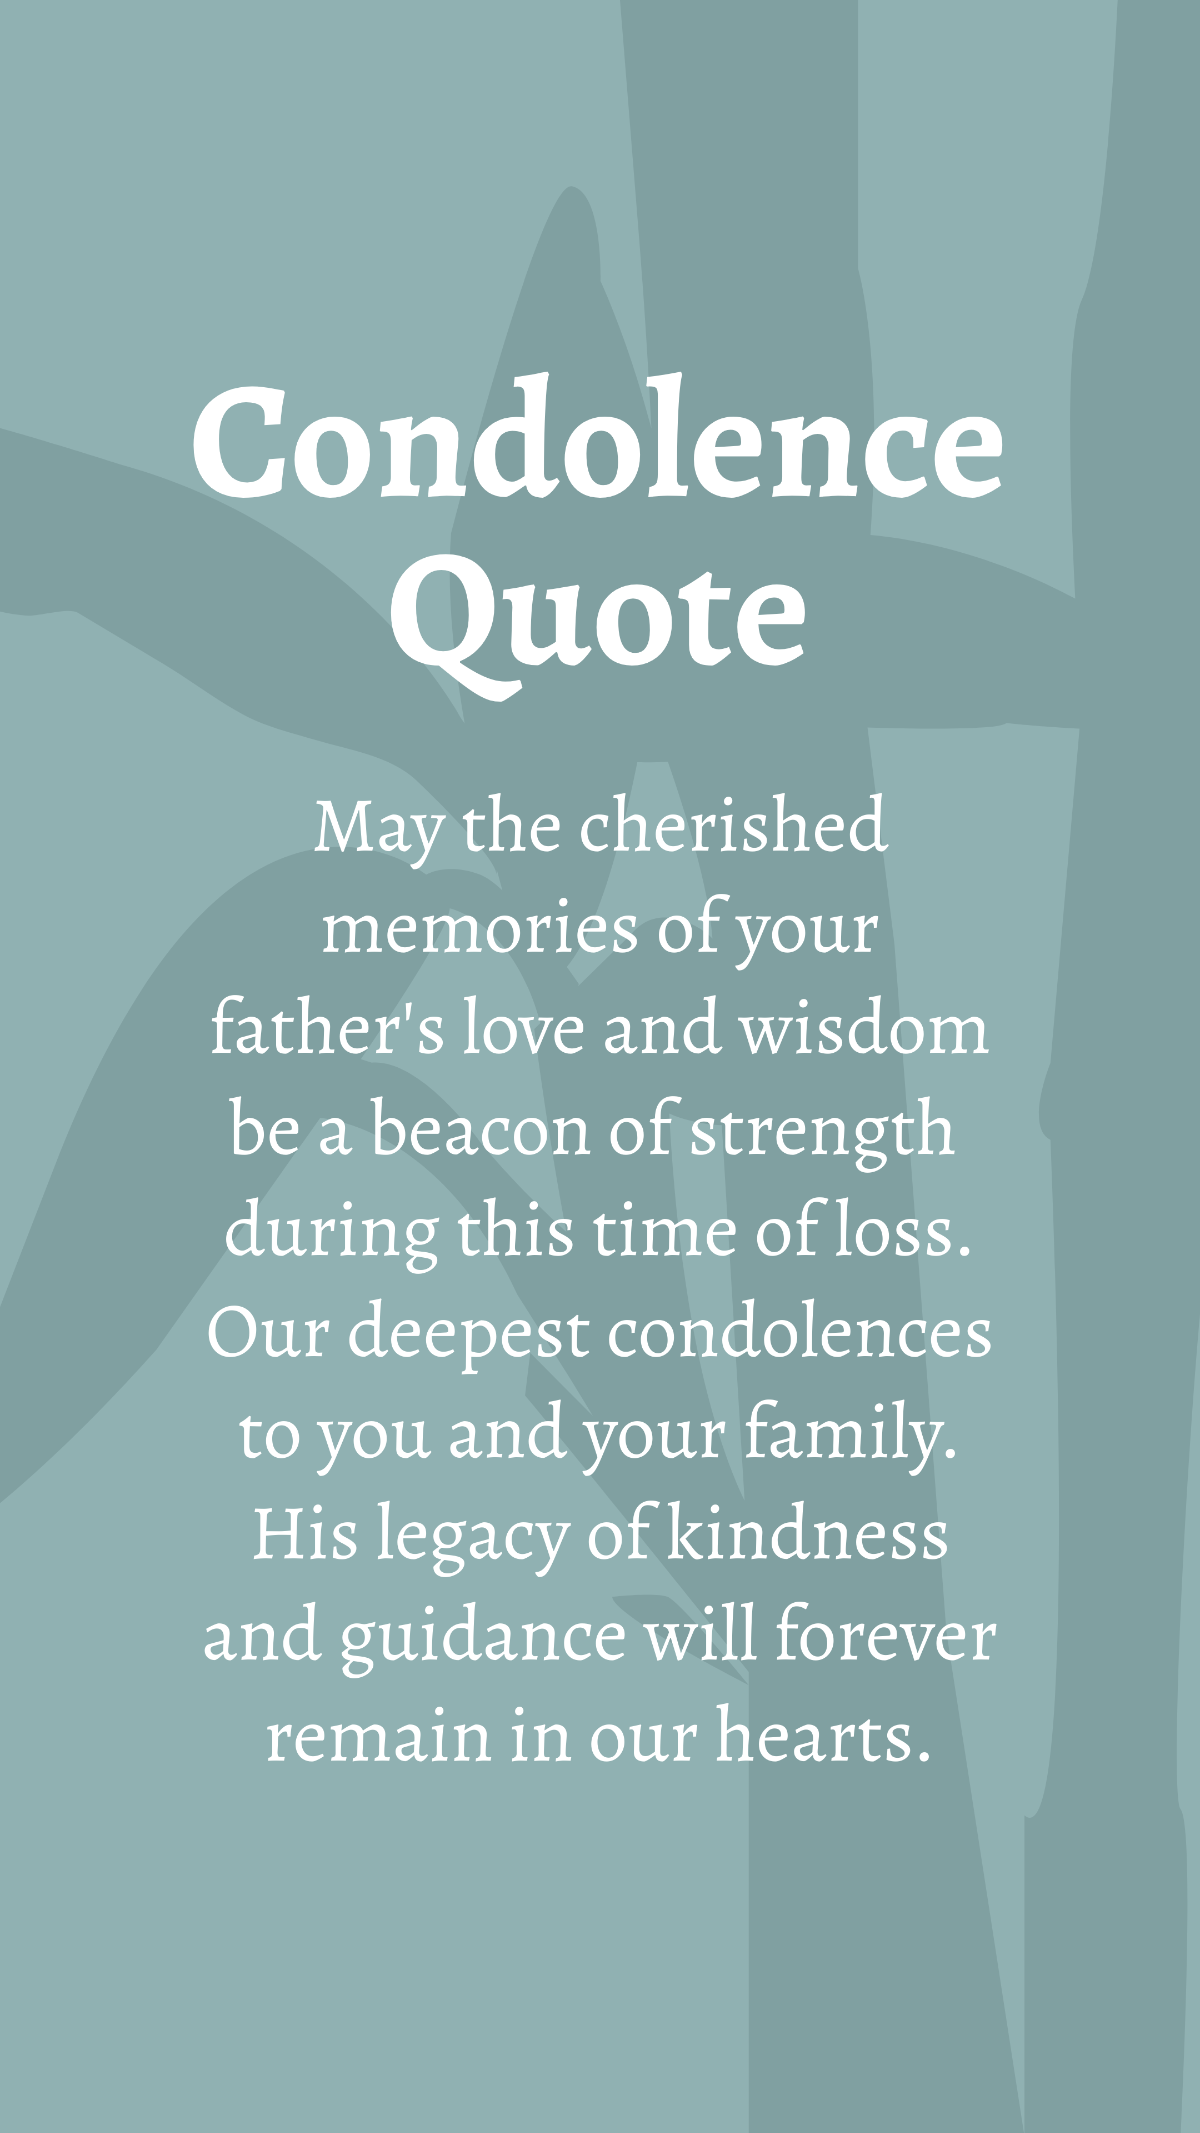 Condolence Loss Of Your Father Quote Template